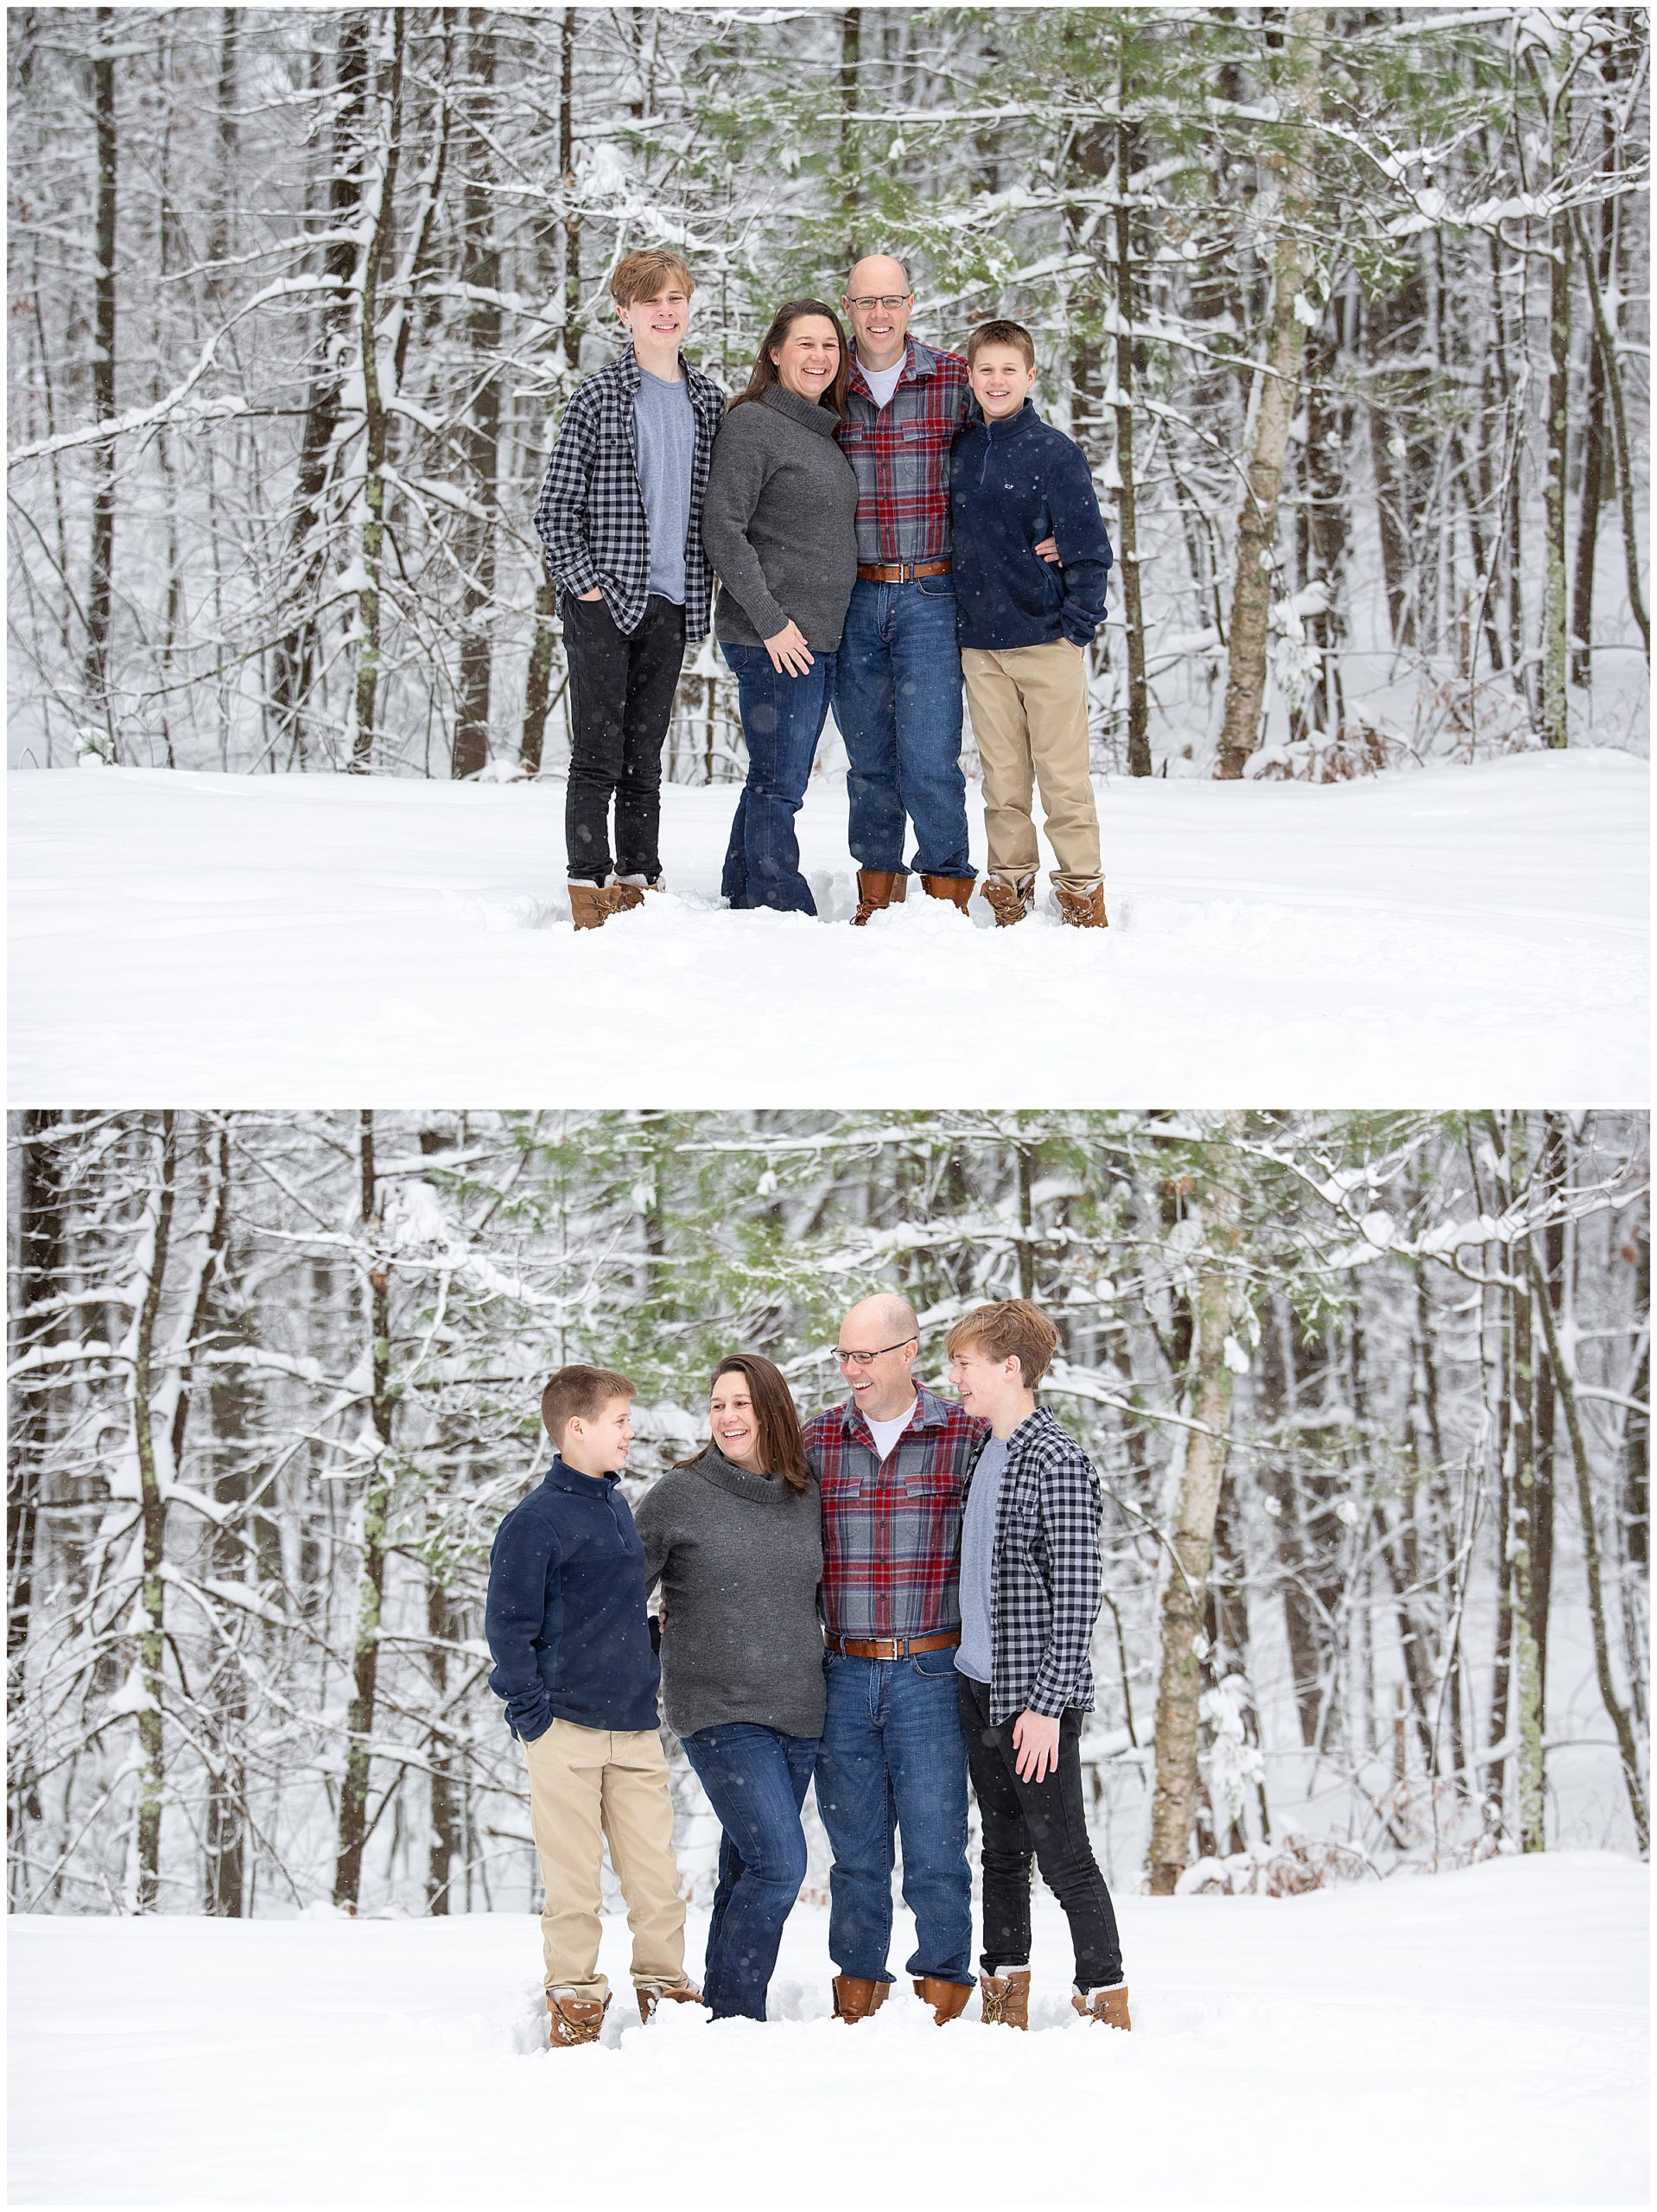 Family poses in the snow